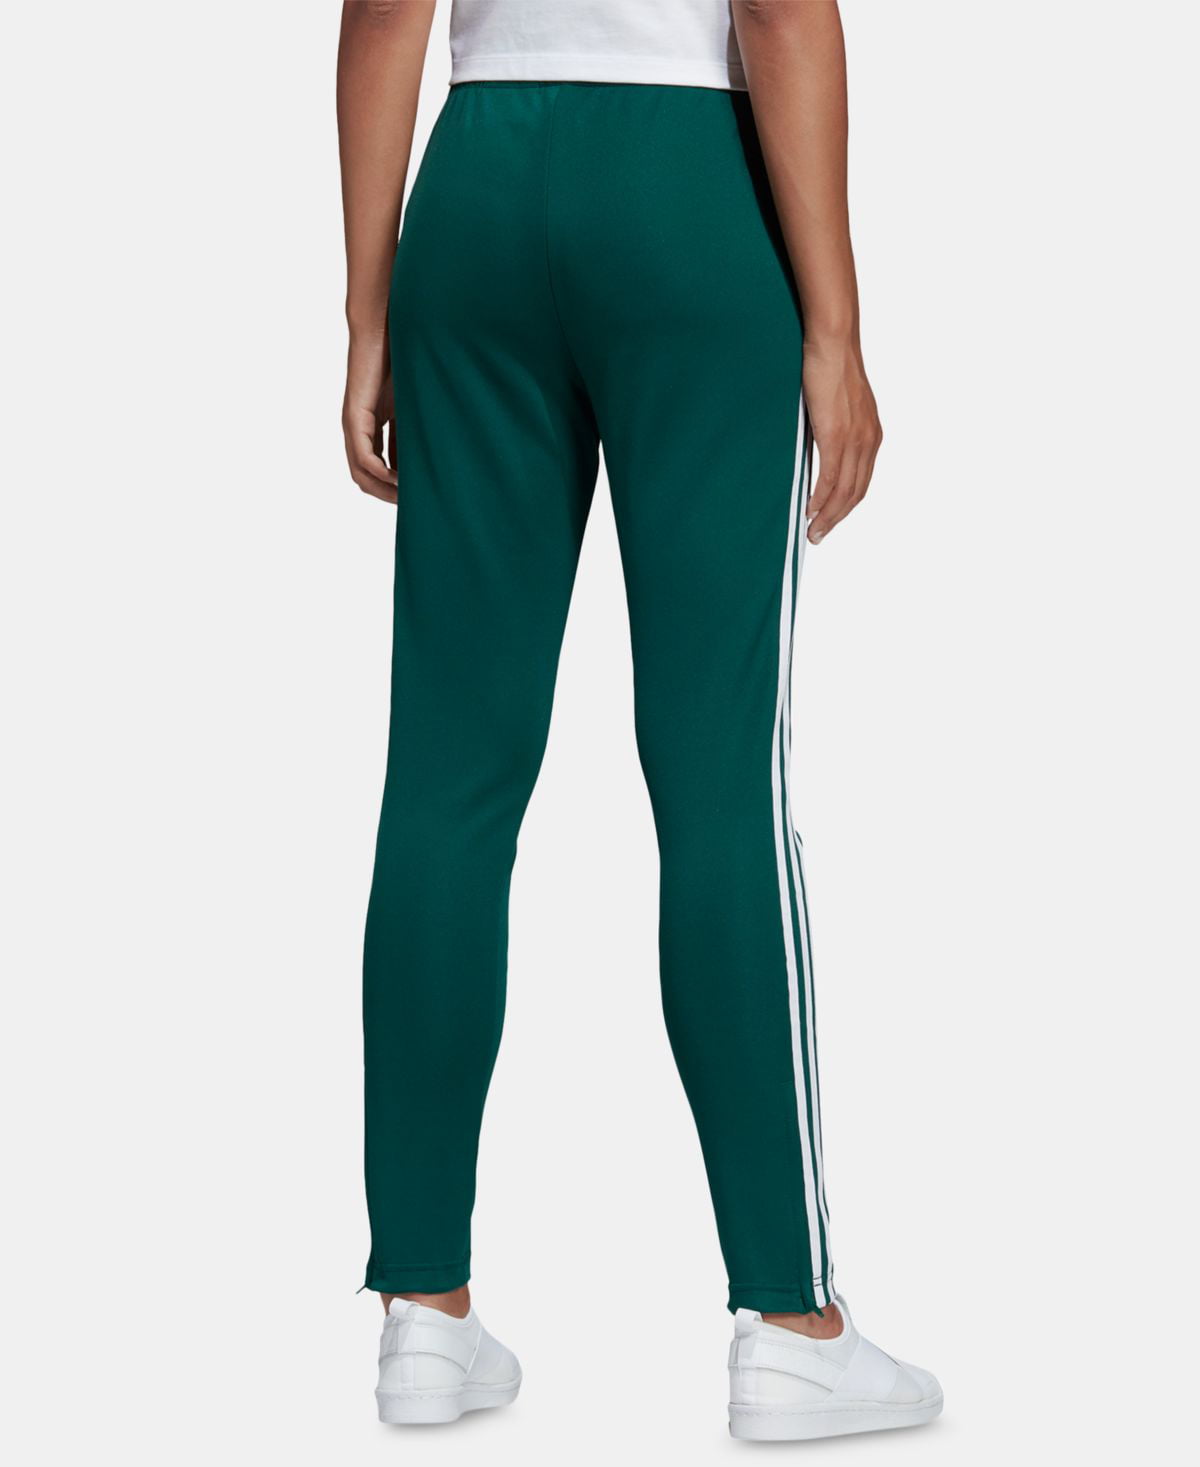 adidas Women's SST Track Pants Green Size X-Large 